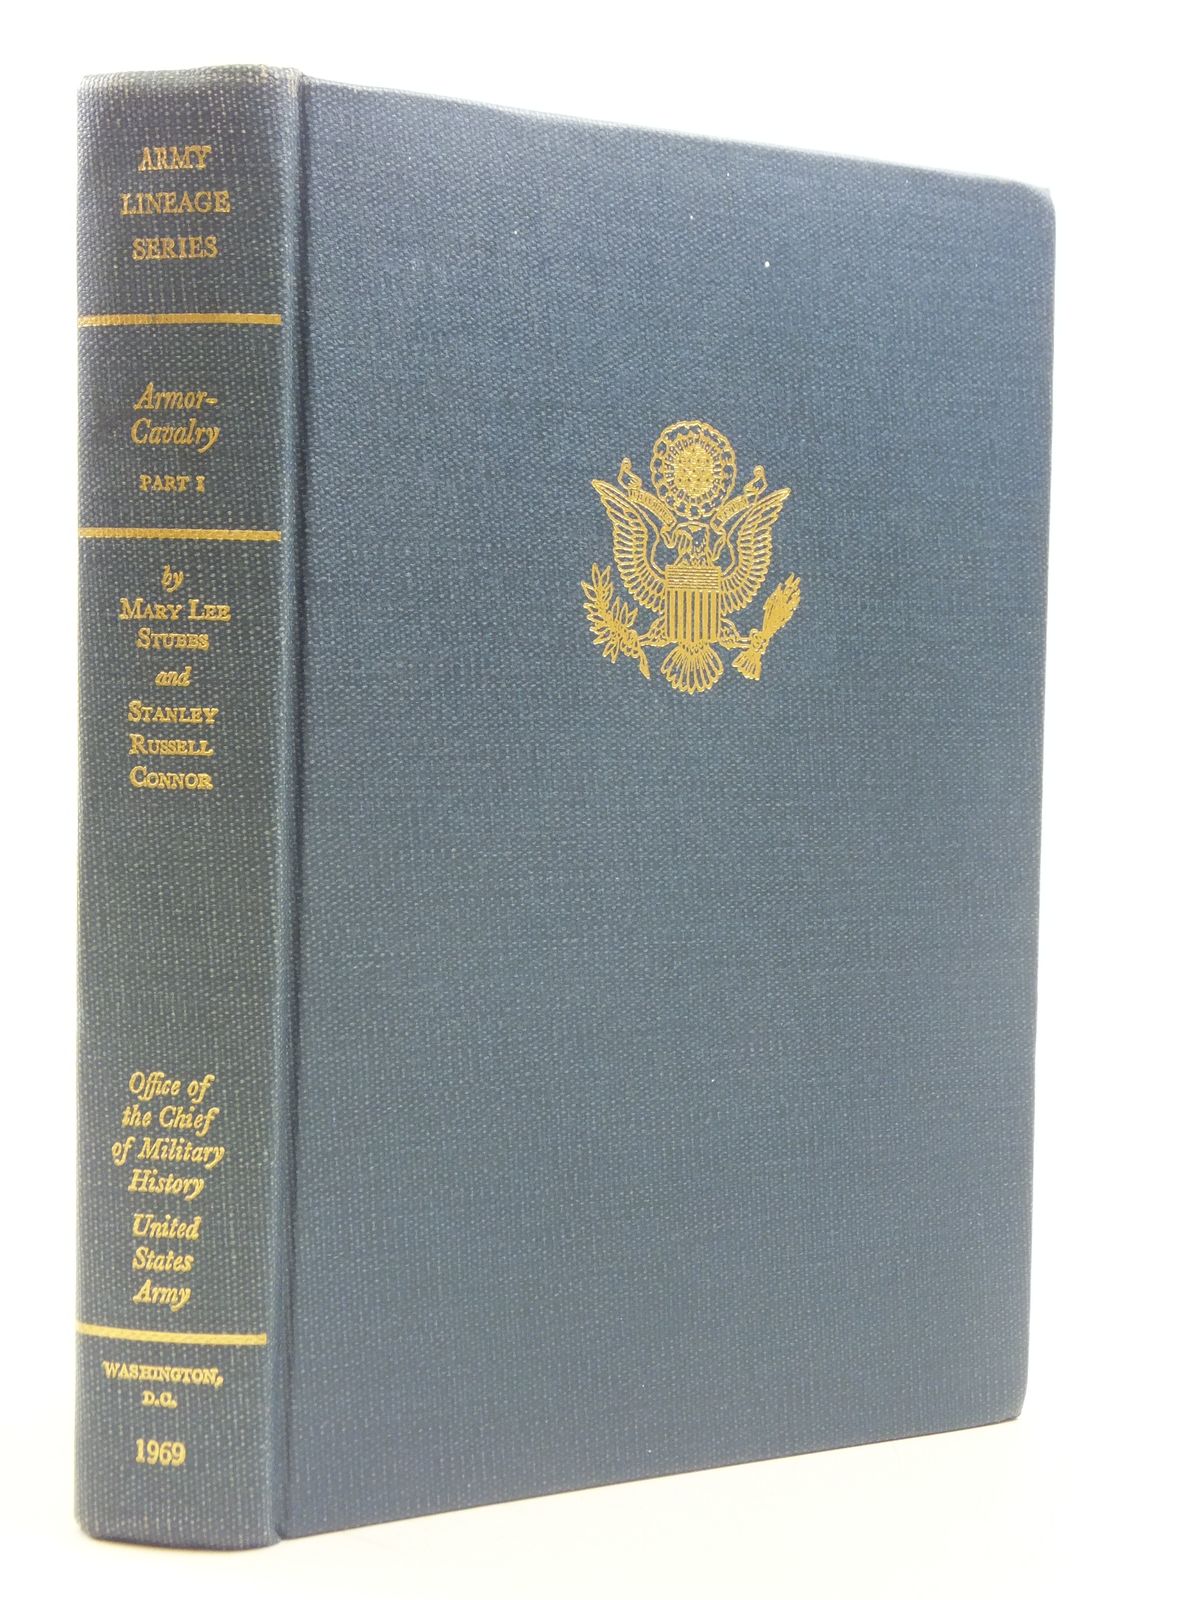 Photo of ARMOR-CAVLARY PART 1 REGULAR ARMY AND ARMY RESERVE written by Stubbs, Mary Lee Connor, Stanley Russell published by Office Of The Chief Of Military History United States Army (STOCK CODE: 1605321)  for sale by Stella & Rose's Books